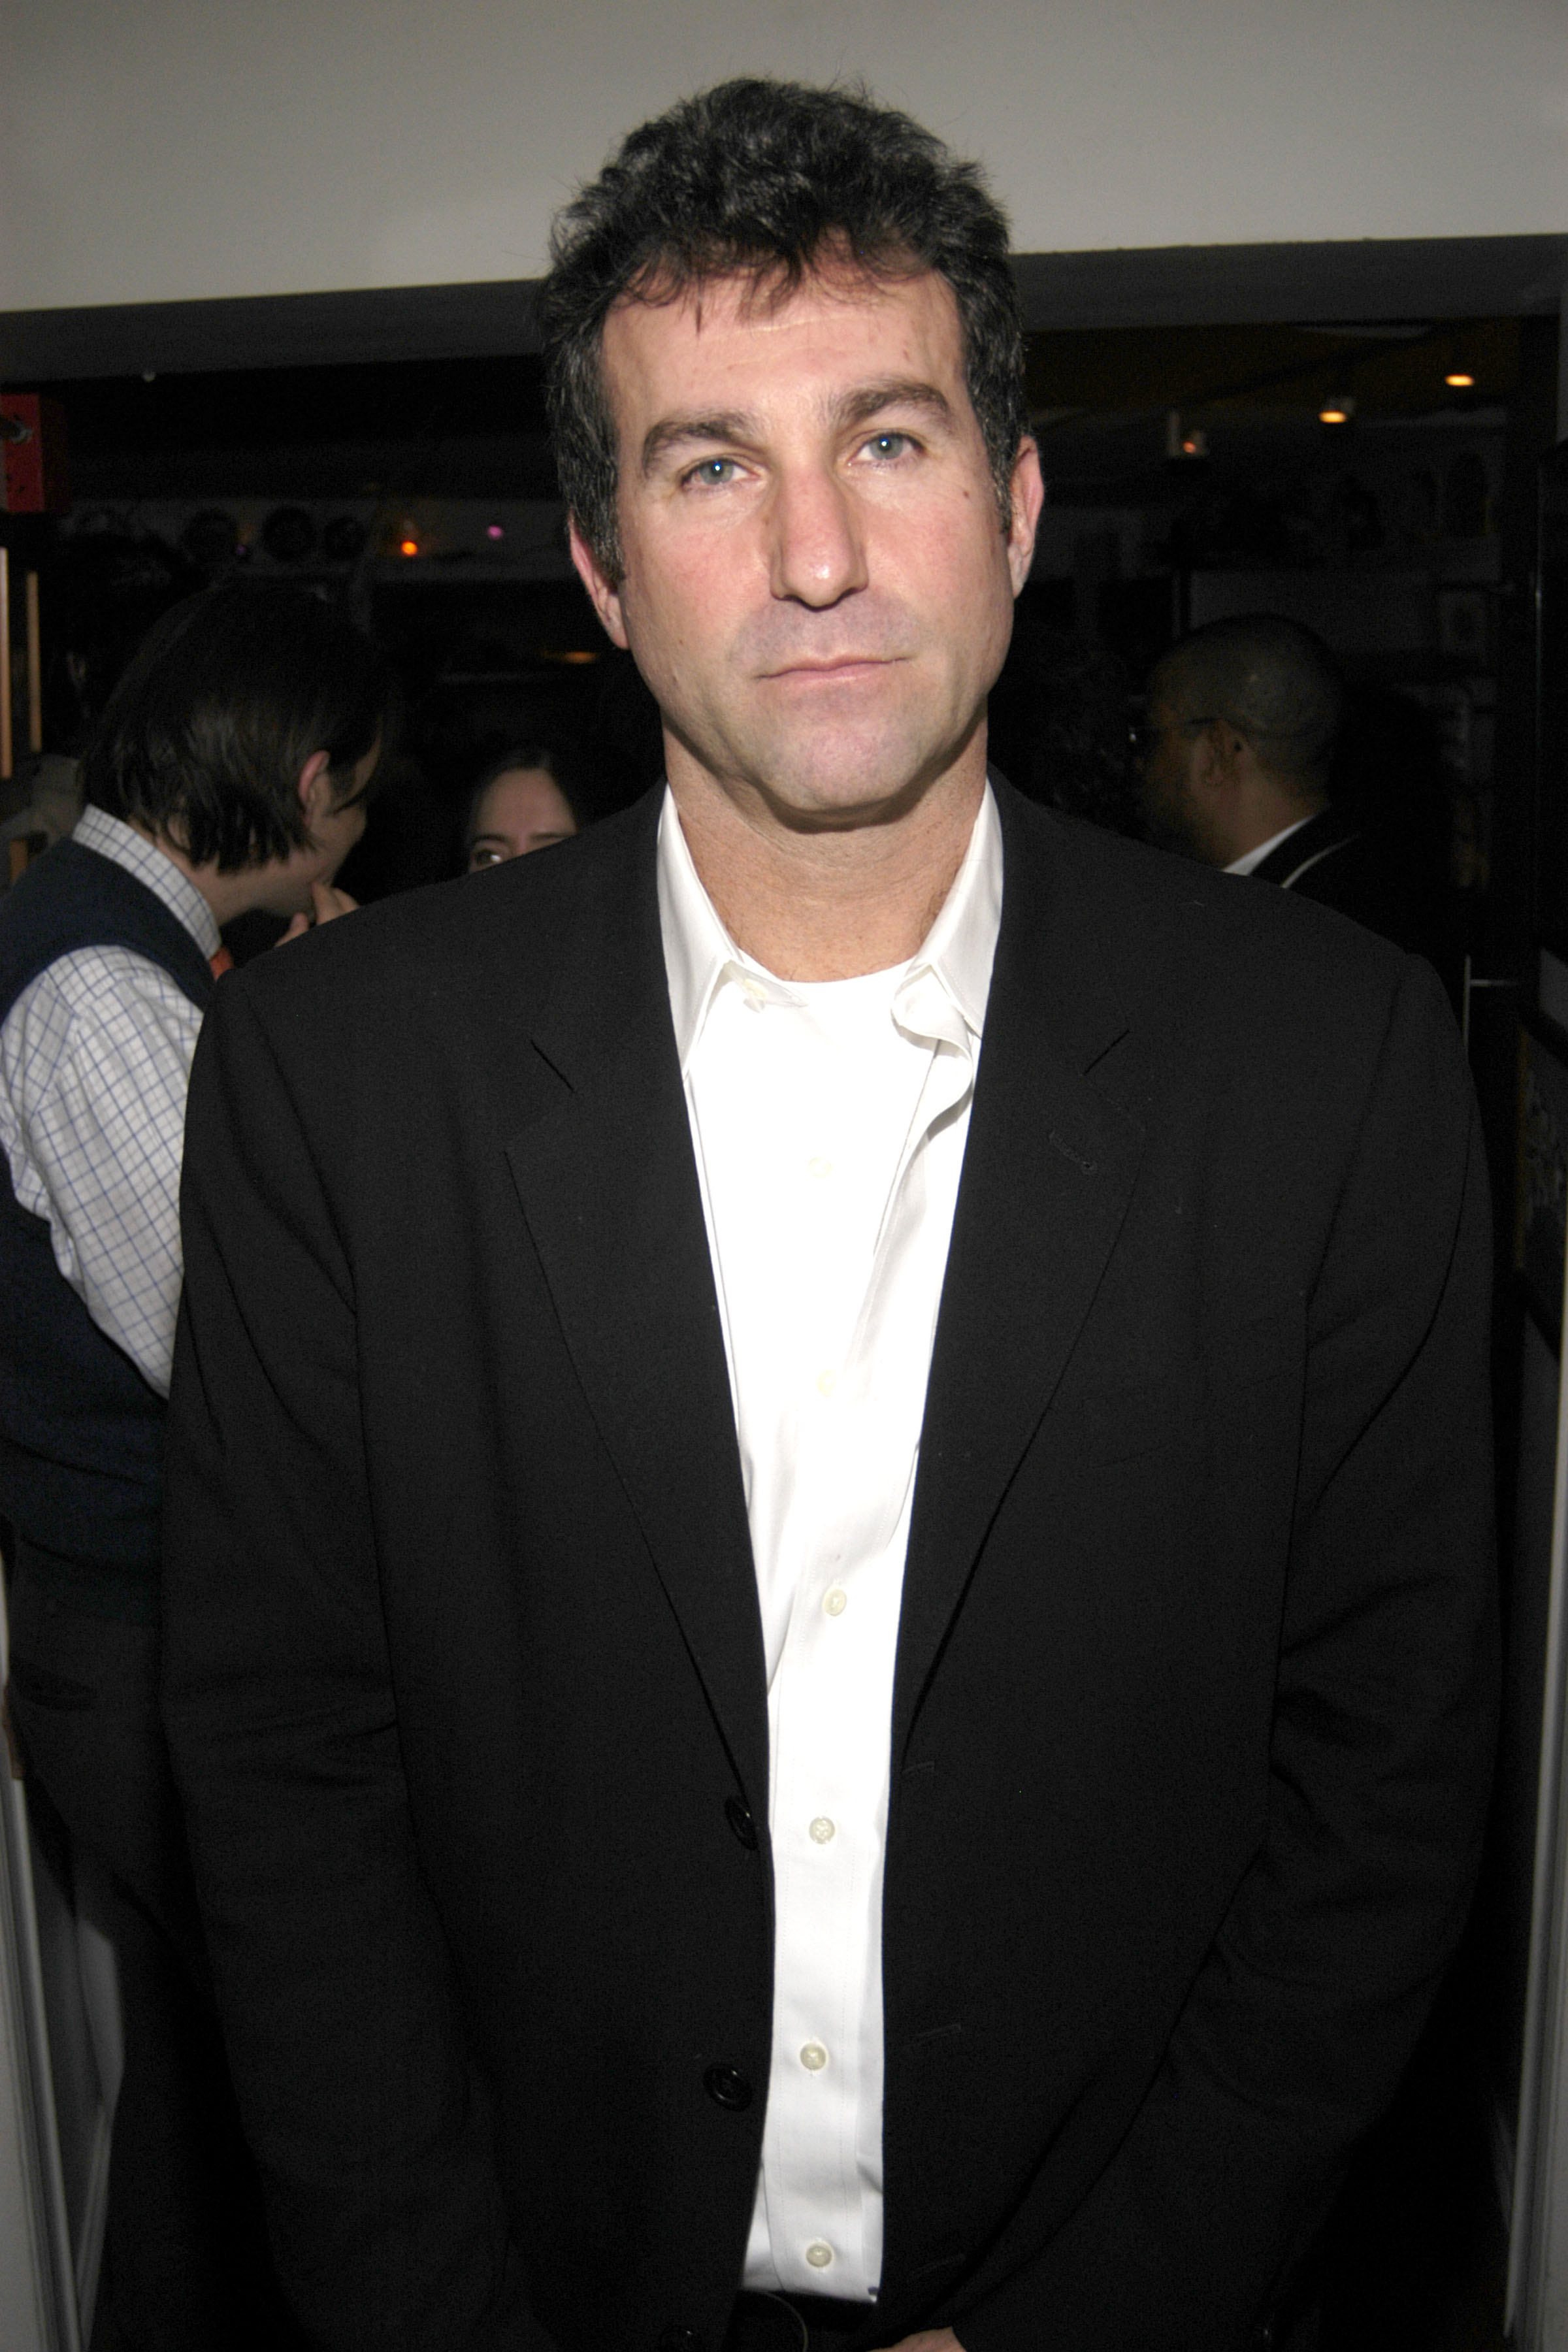 Ken Friedman attends New York Magazines 3rd Annual Oscar Viewing Party at The Spotted Pig on February 24, 2008 in New York City. (Patrick McMullan—Patrick McMullan via Getty Images)